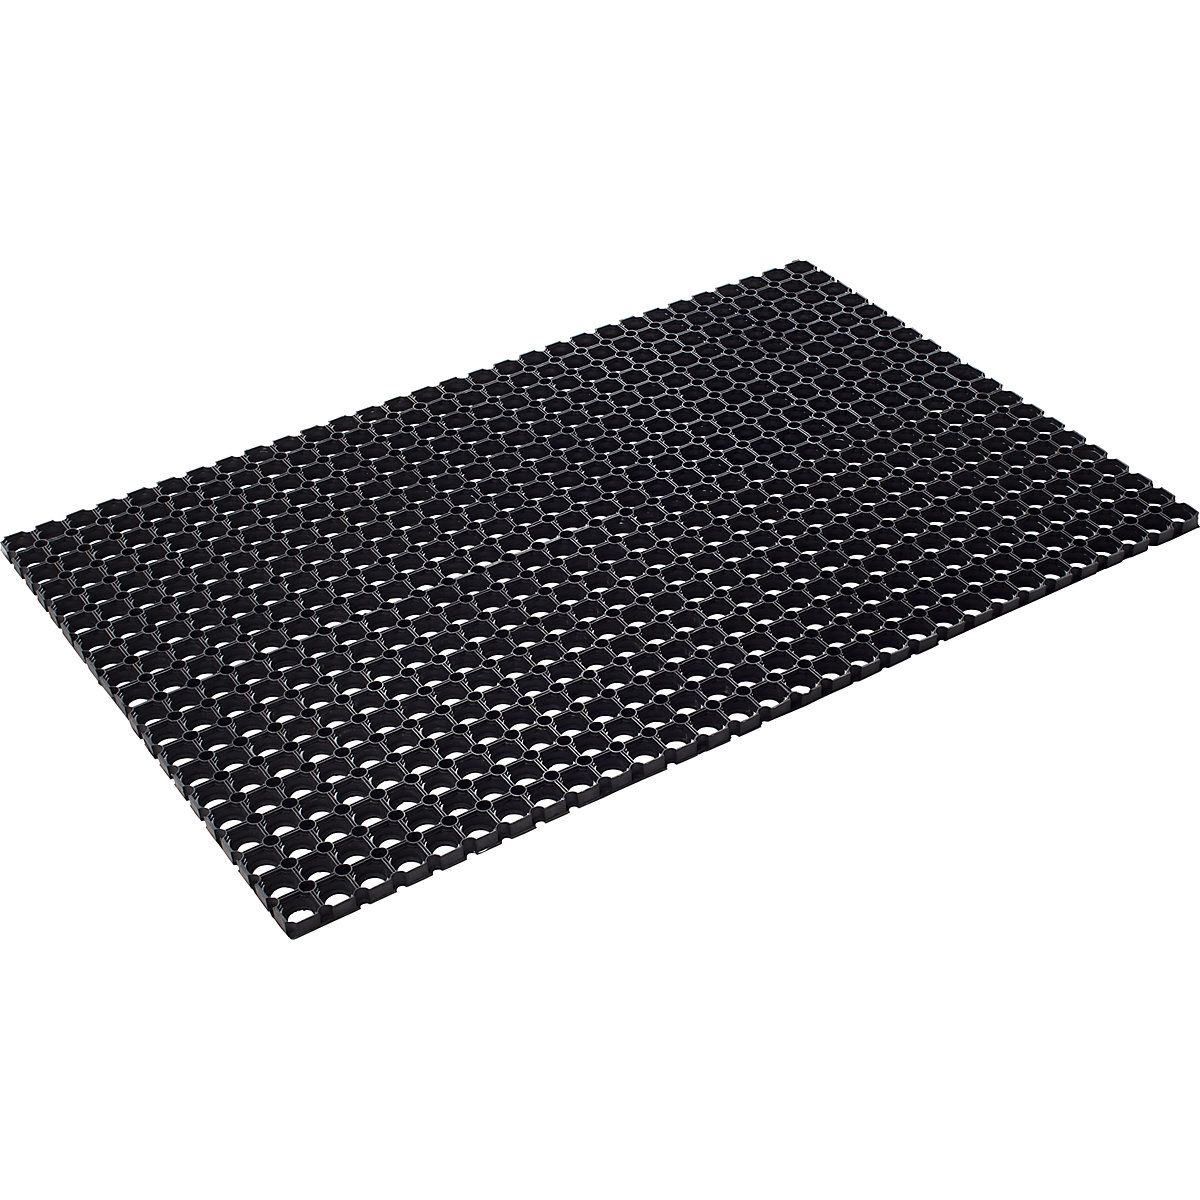 EAZYCARE SCRUB rubber ring matting, mat height 22 mm, LxW 1200 x 800 mm, pack of 1